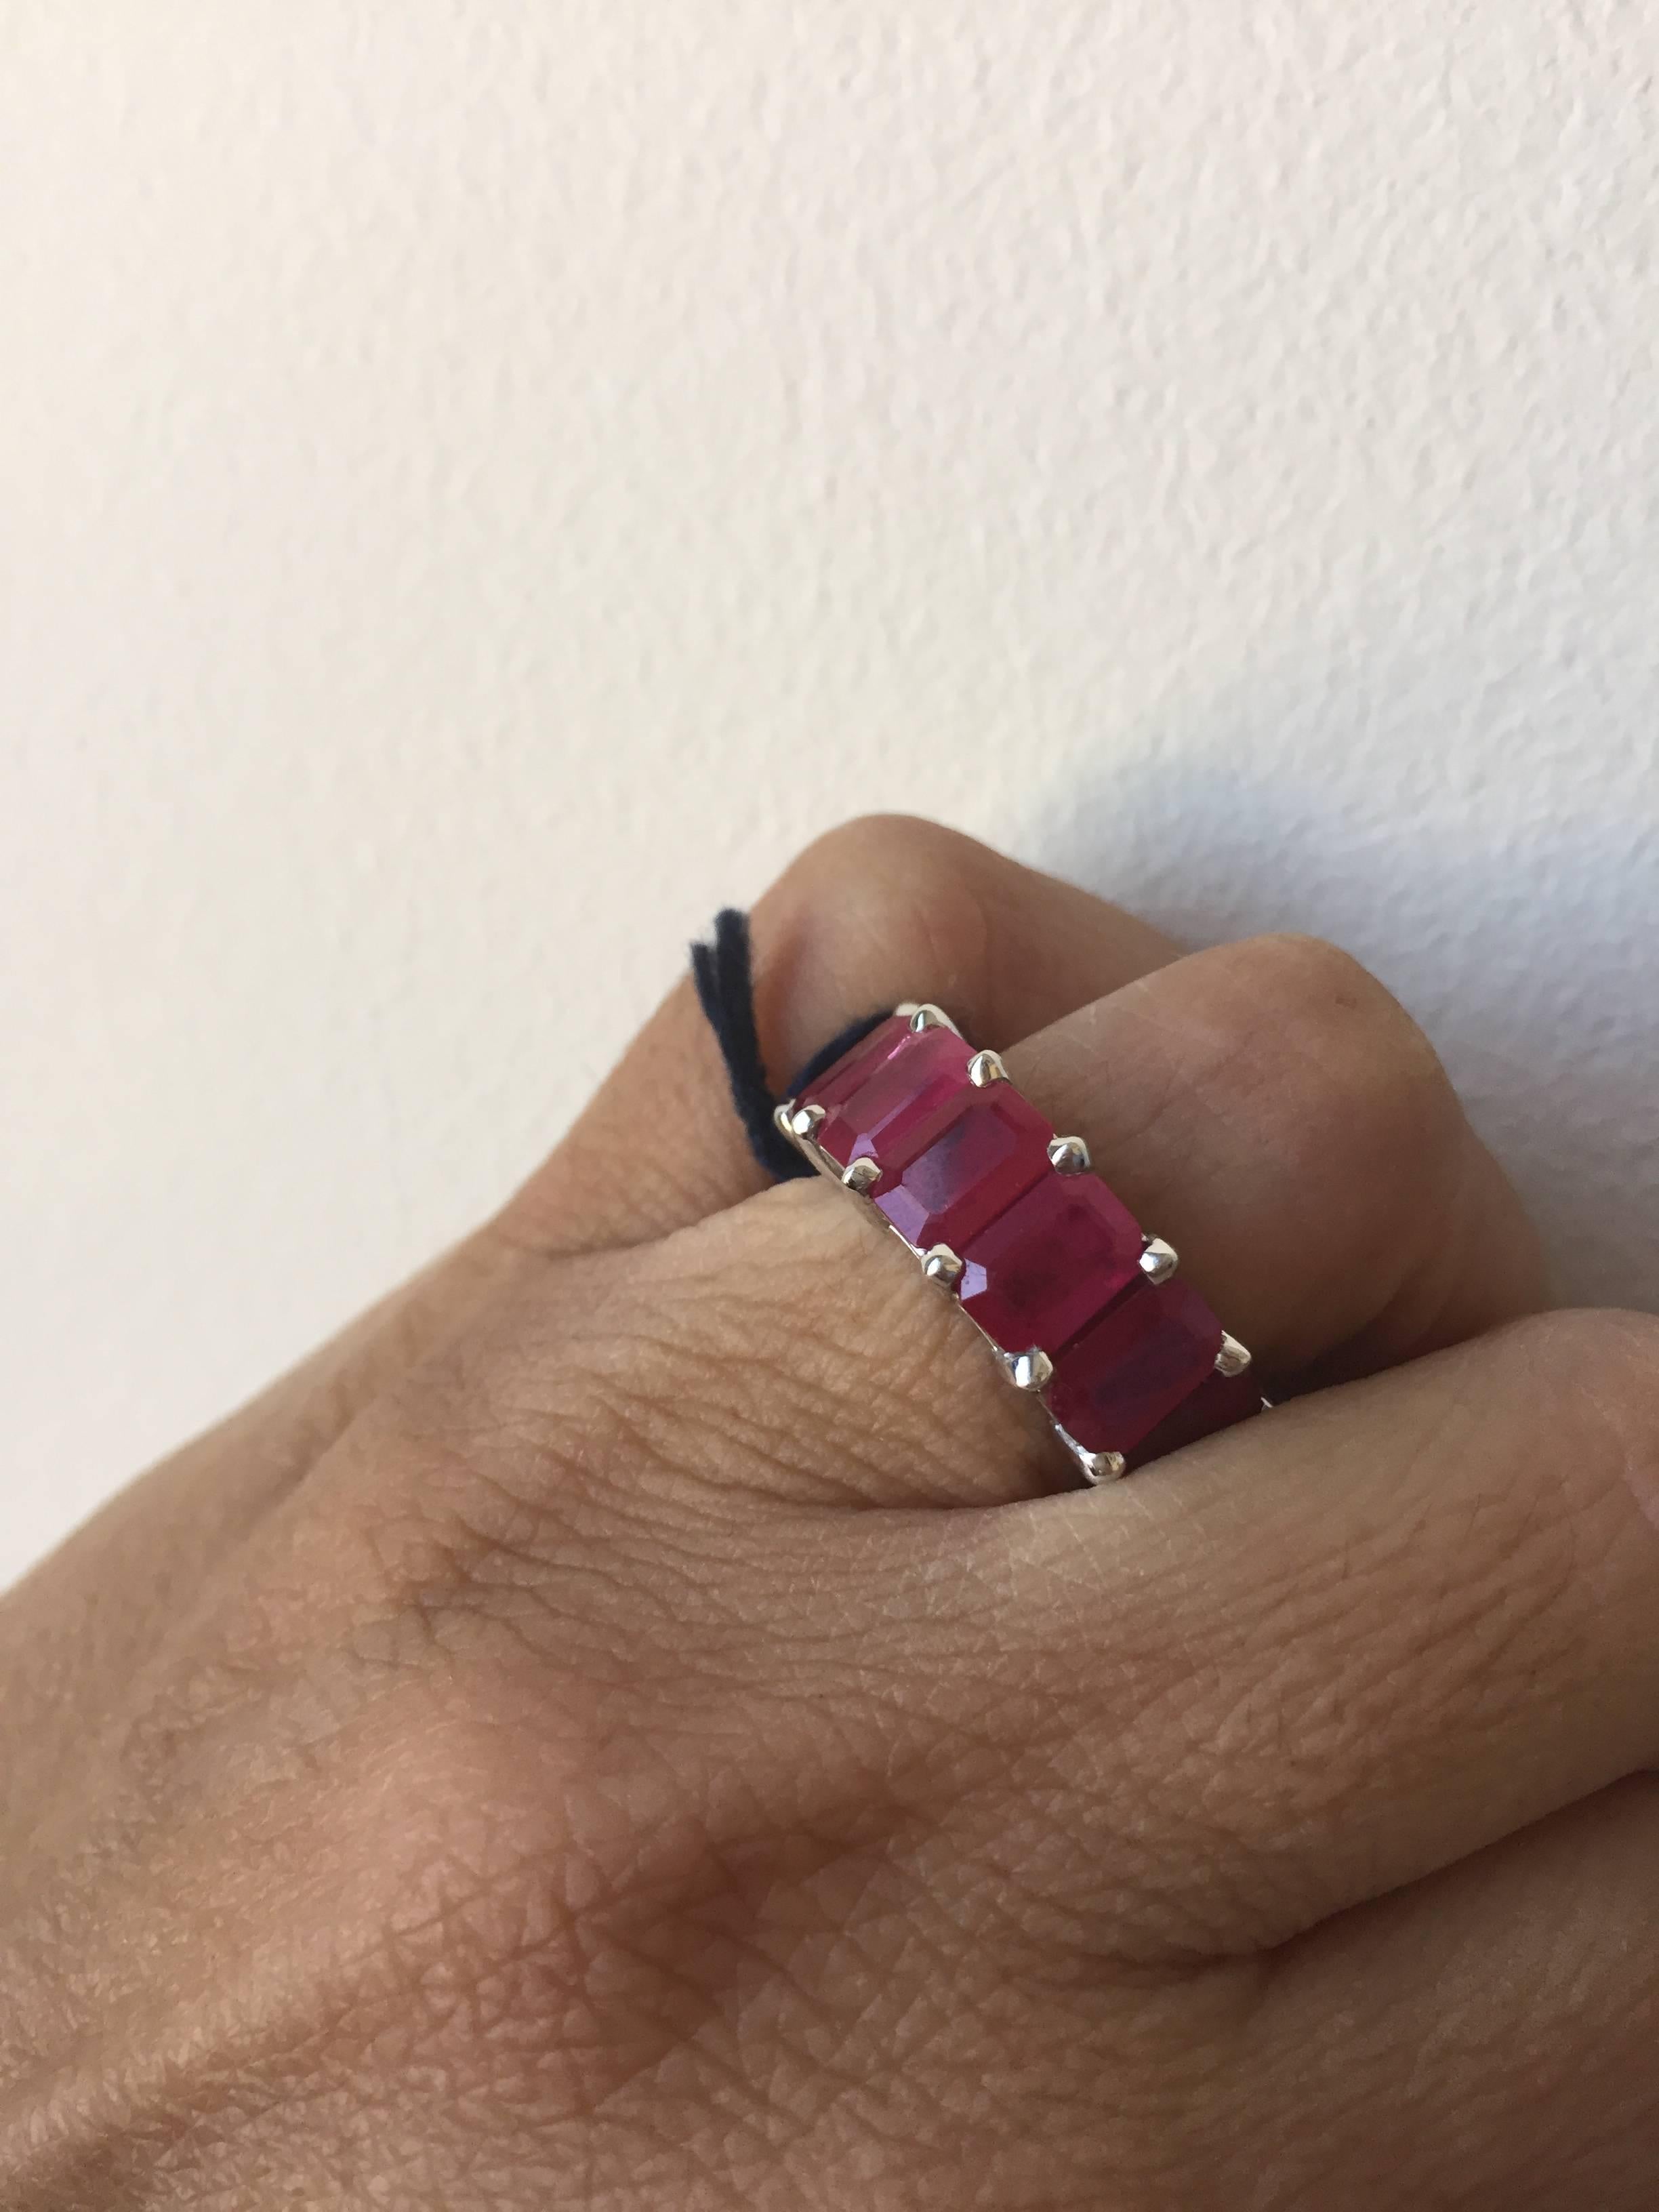 Exquisite one of a kind eternity, Burma Ruby Ring set in 14K white gold. The stones in this ring are emerald cut, each stone weighs approximately one carat. It is an absolutely stunning piece. The total weight is 11.63 carats. The ring is a size 6.
